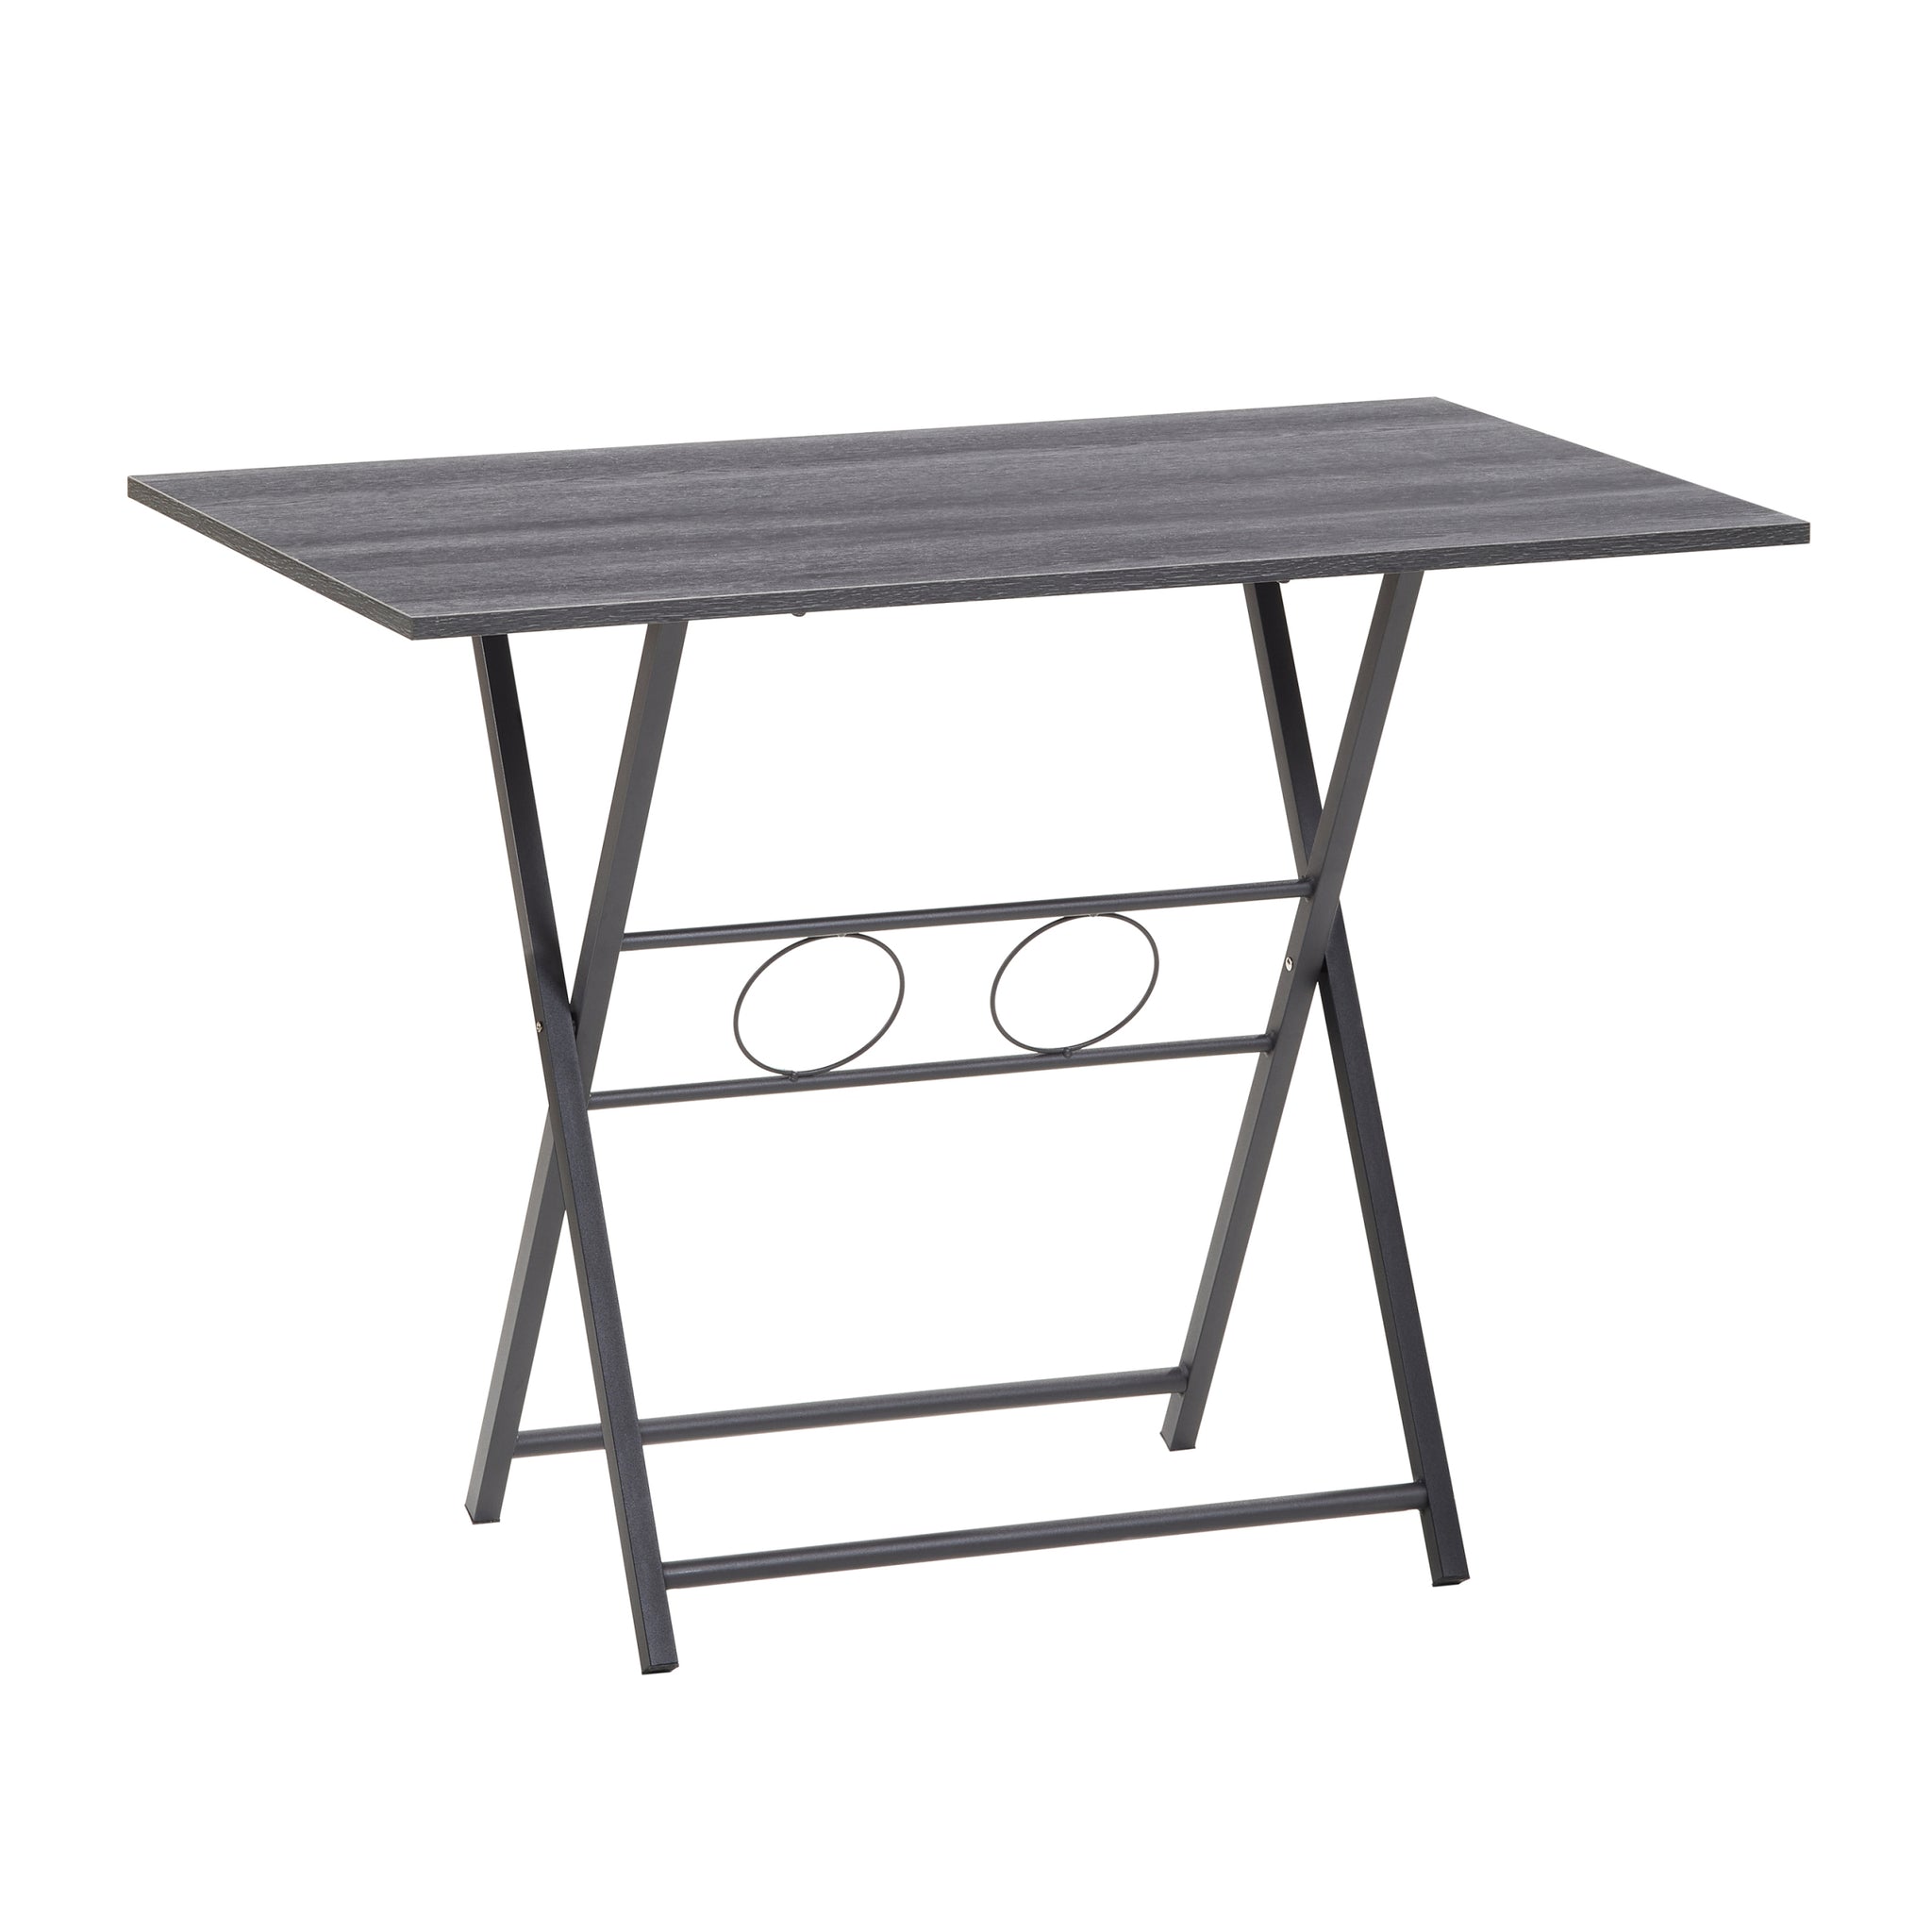 Small Foldable Desk for Small Spaces, Living Room